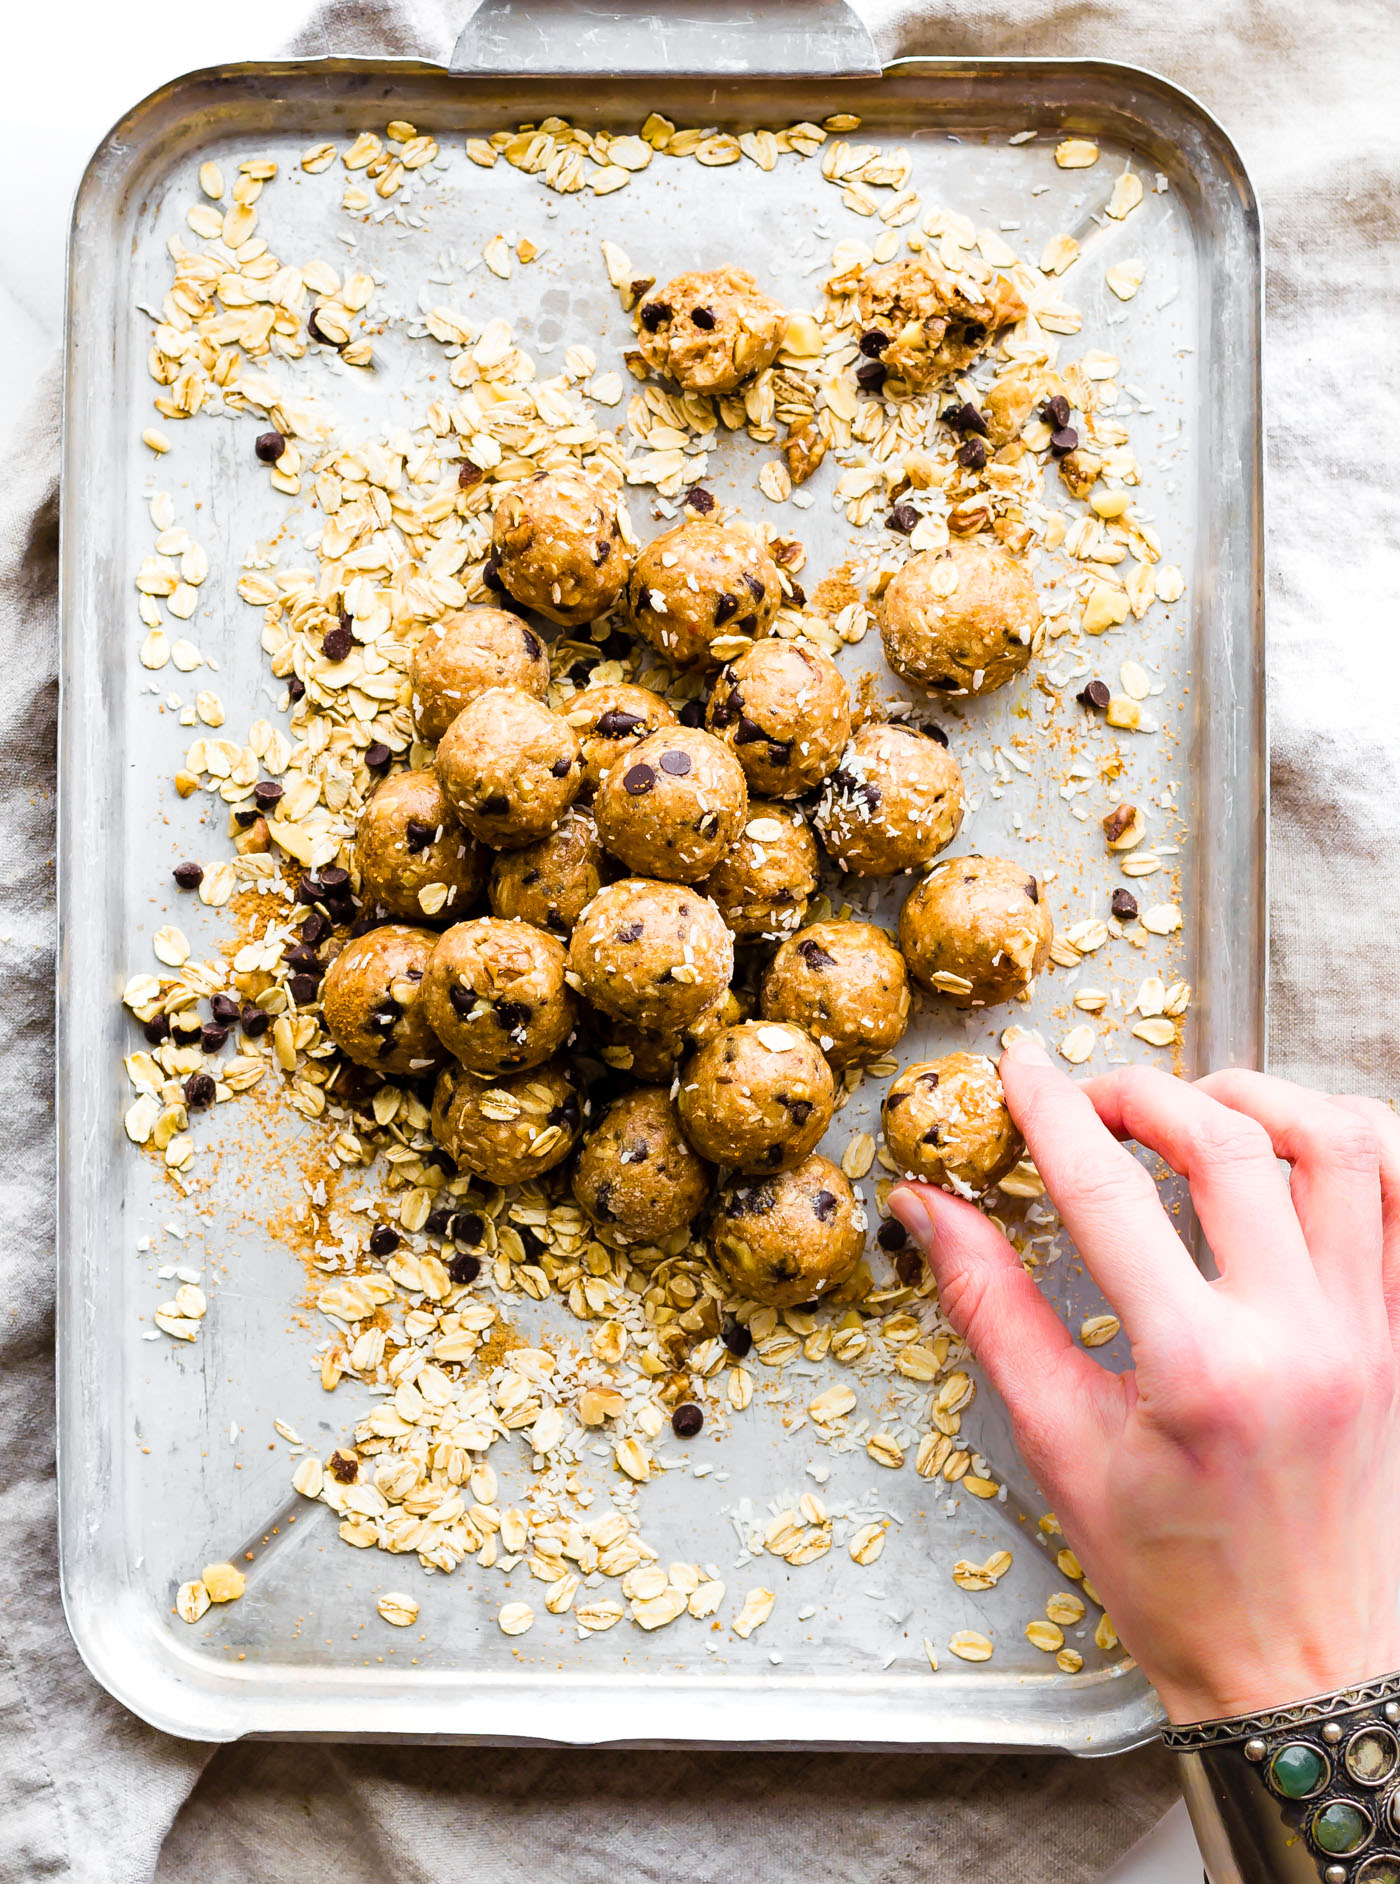 Cowboy Cookies in a no bake ENERGY BITES form! Yes, the best of both worlds. No baking, vegan energy bites that taste like cowboy cookies! Soft, chewy, and loaded with a variety of flavors. Gluten free!